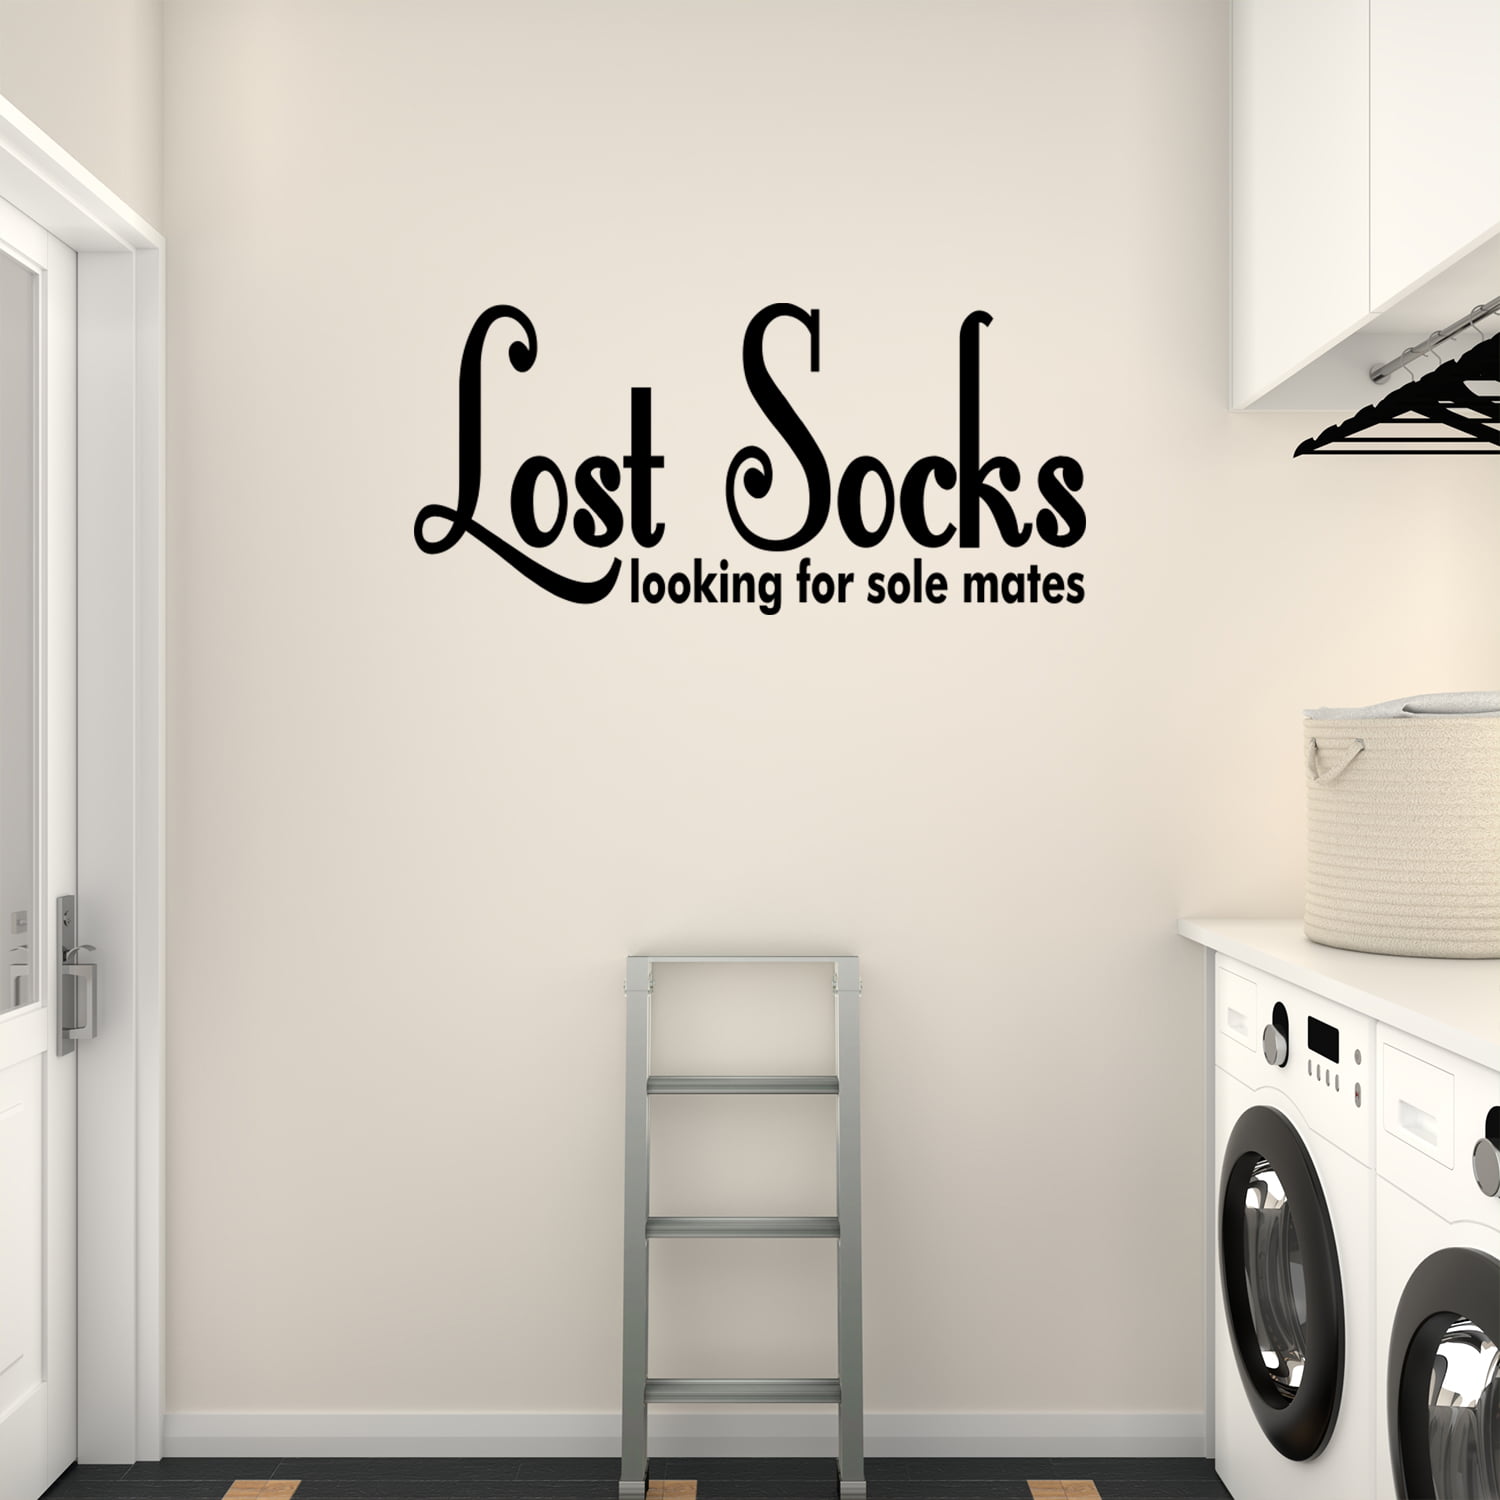 Laundry Room Wash Dry Fold Wall Sticker Decal Lettering Words Quote Art Vinyl